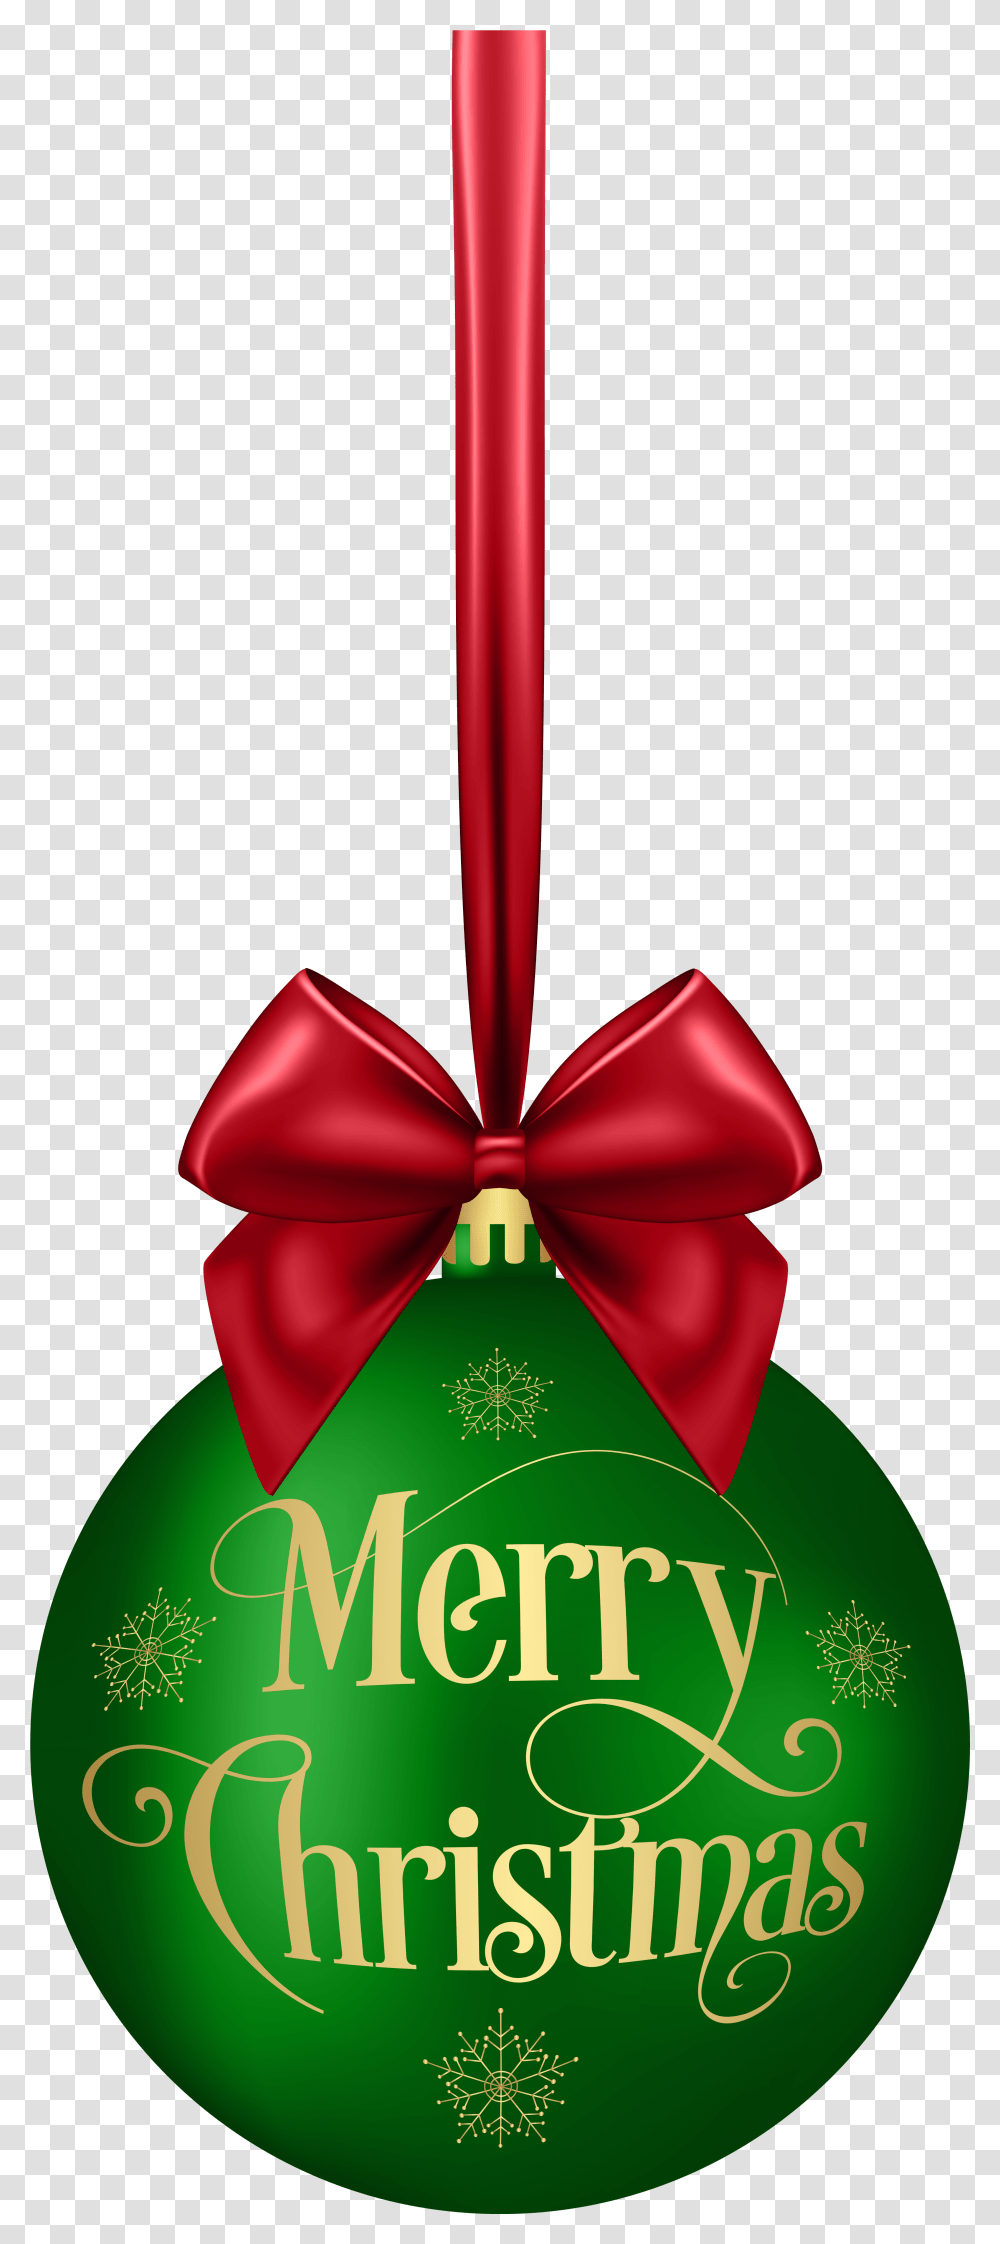 Free Merry Christmas Ball Greendeco Merry Christmas Balls Clipart, Plant, Beverage, Drink Transparent Png